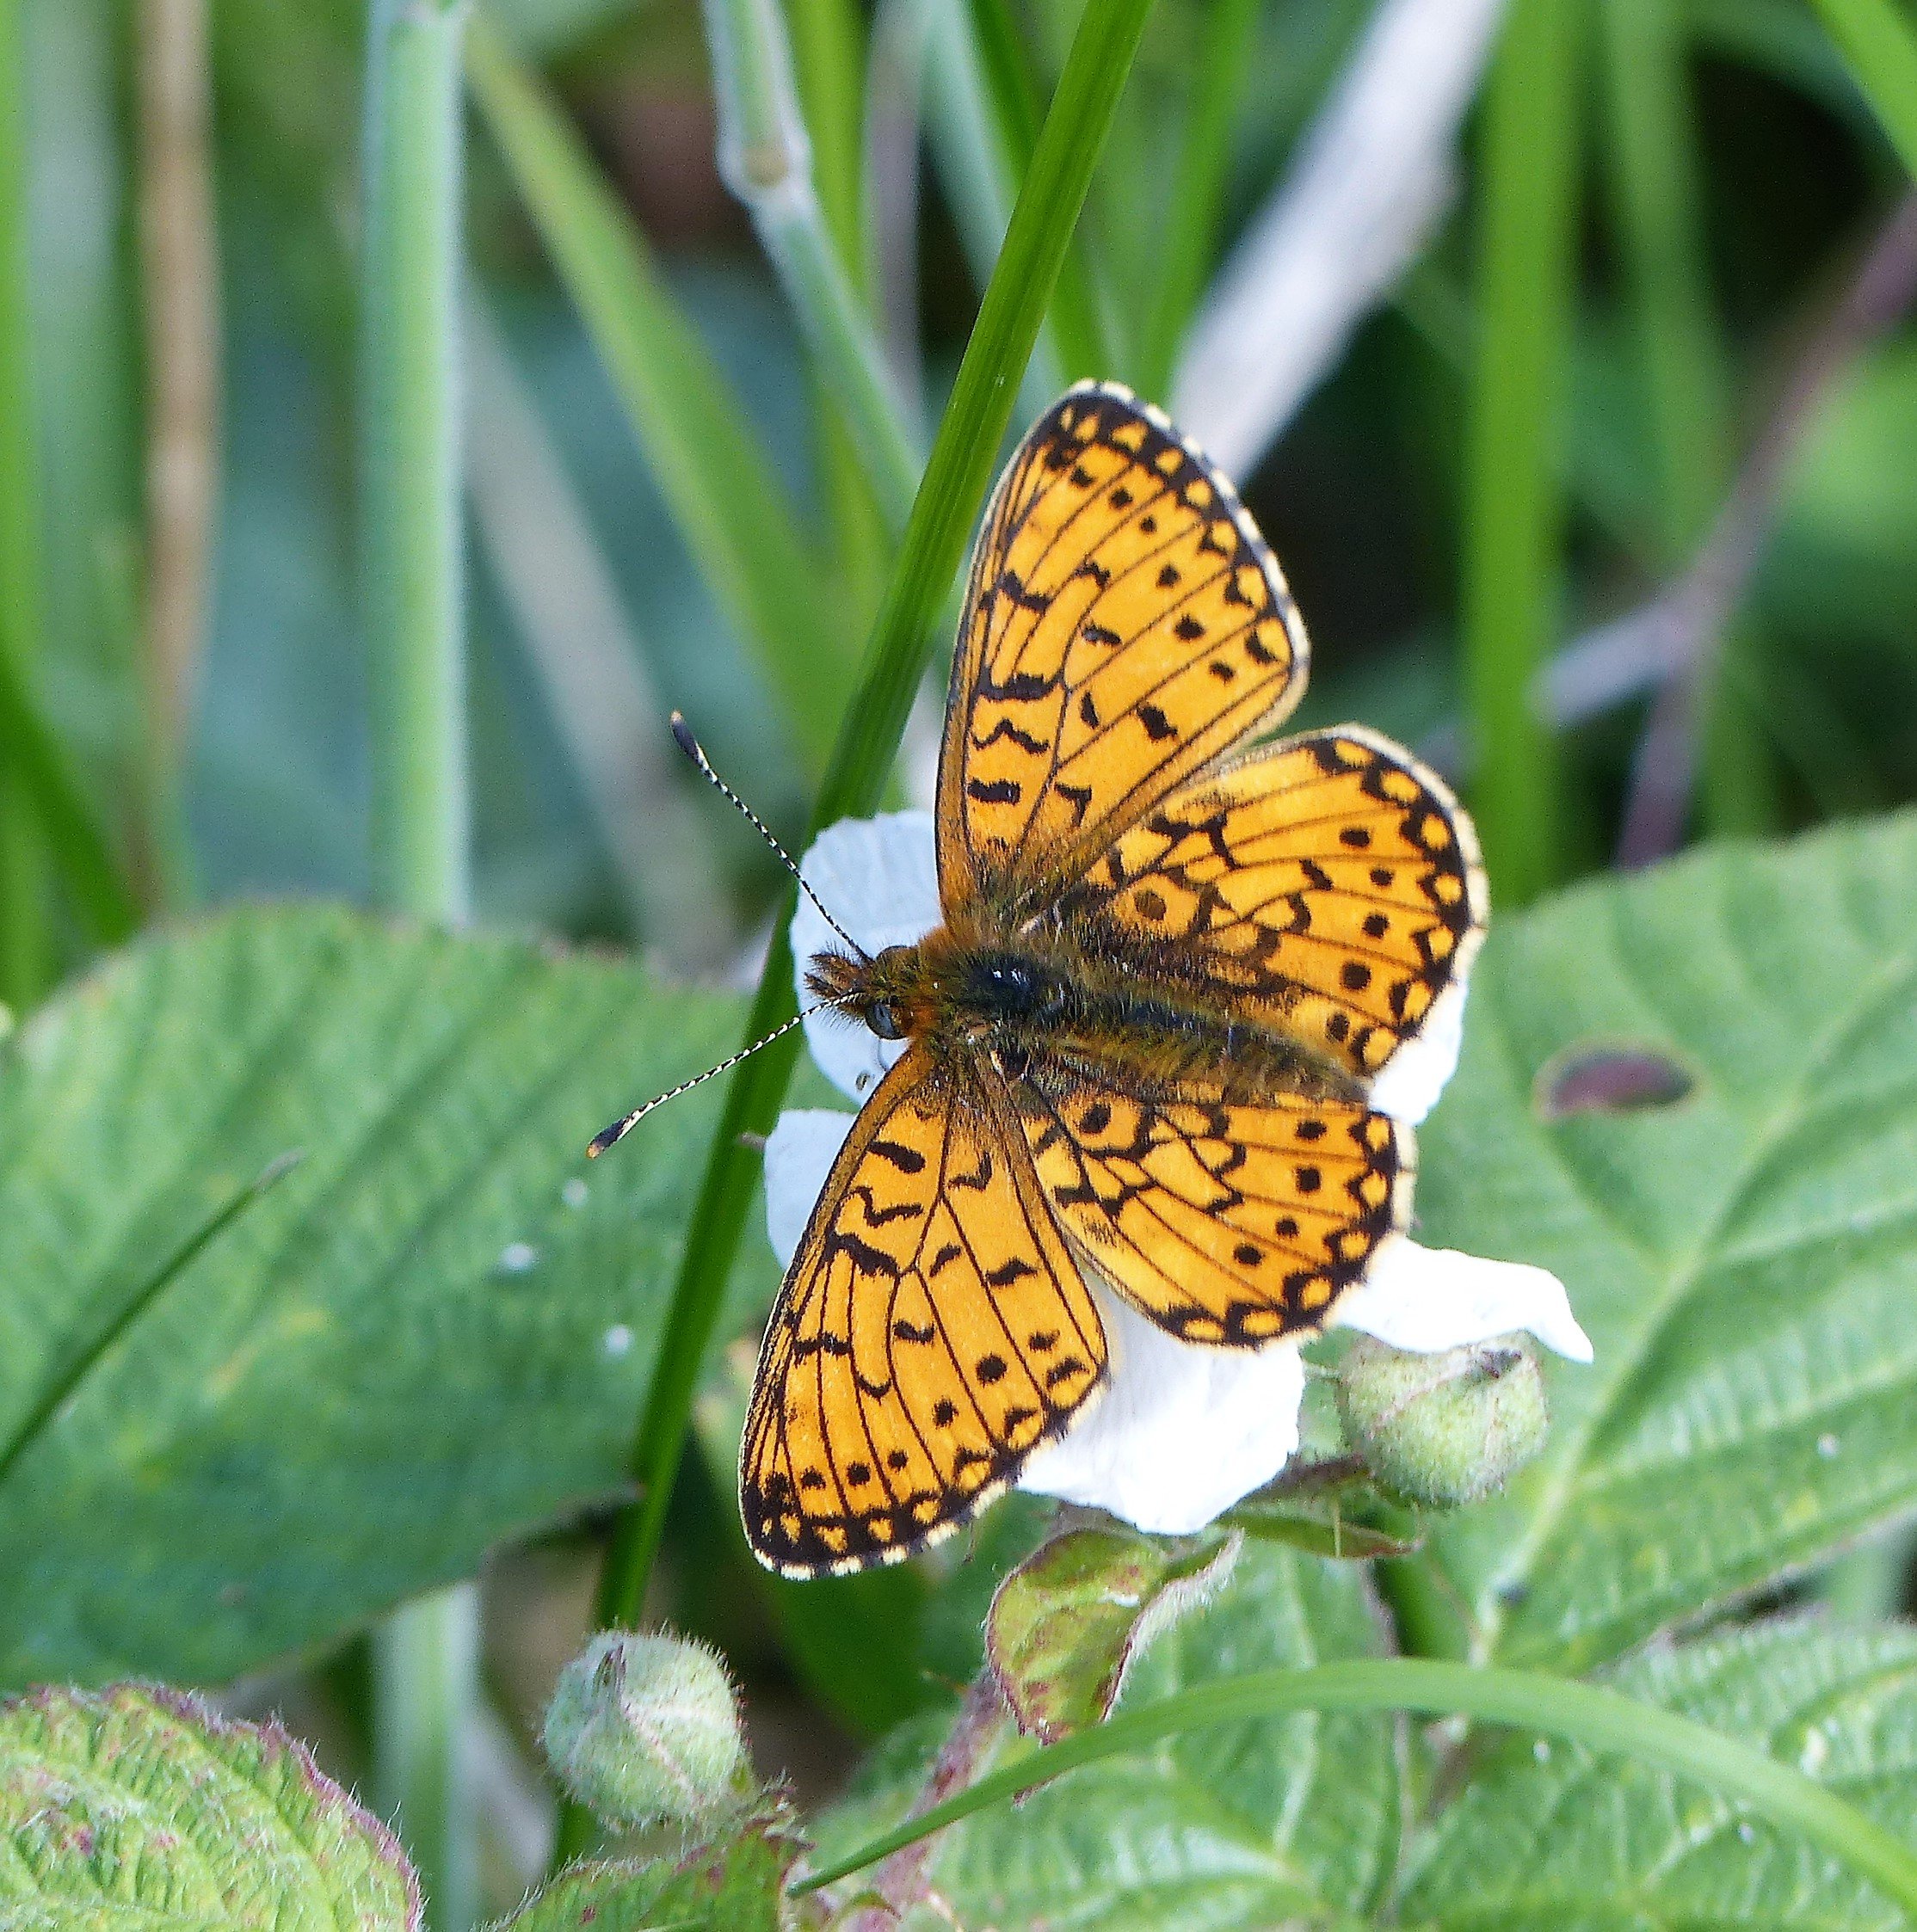 Organisers of Shropshire's first butterfly and moth festival, say help record rare species. Pictured is a Dark Green Fritillary butterfly. Credit Mike Williams .JPG